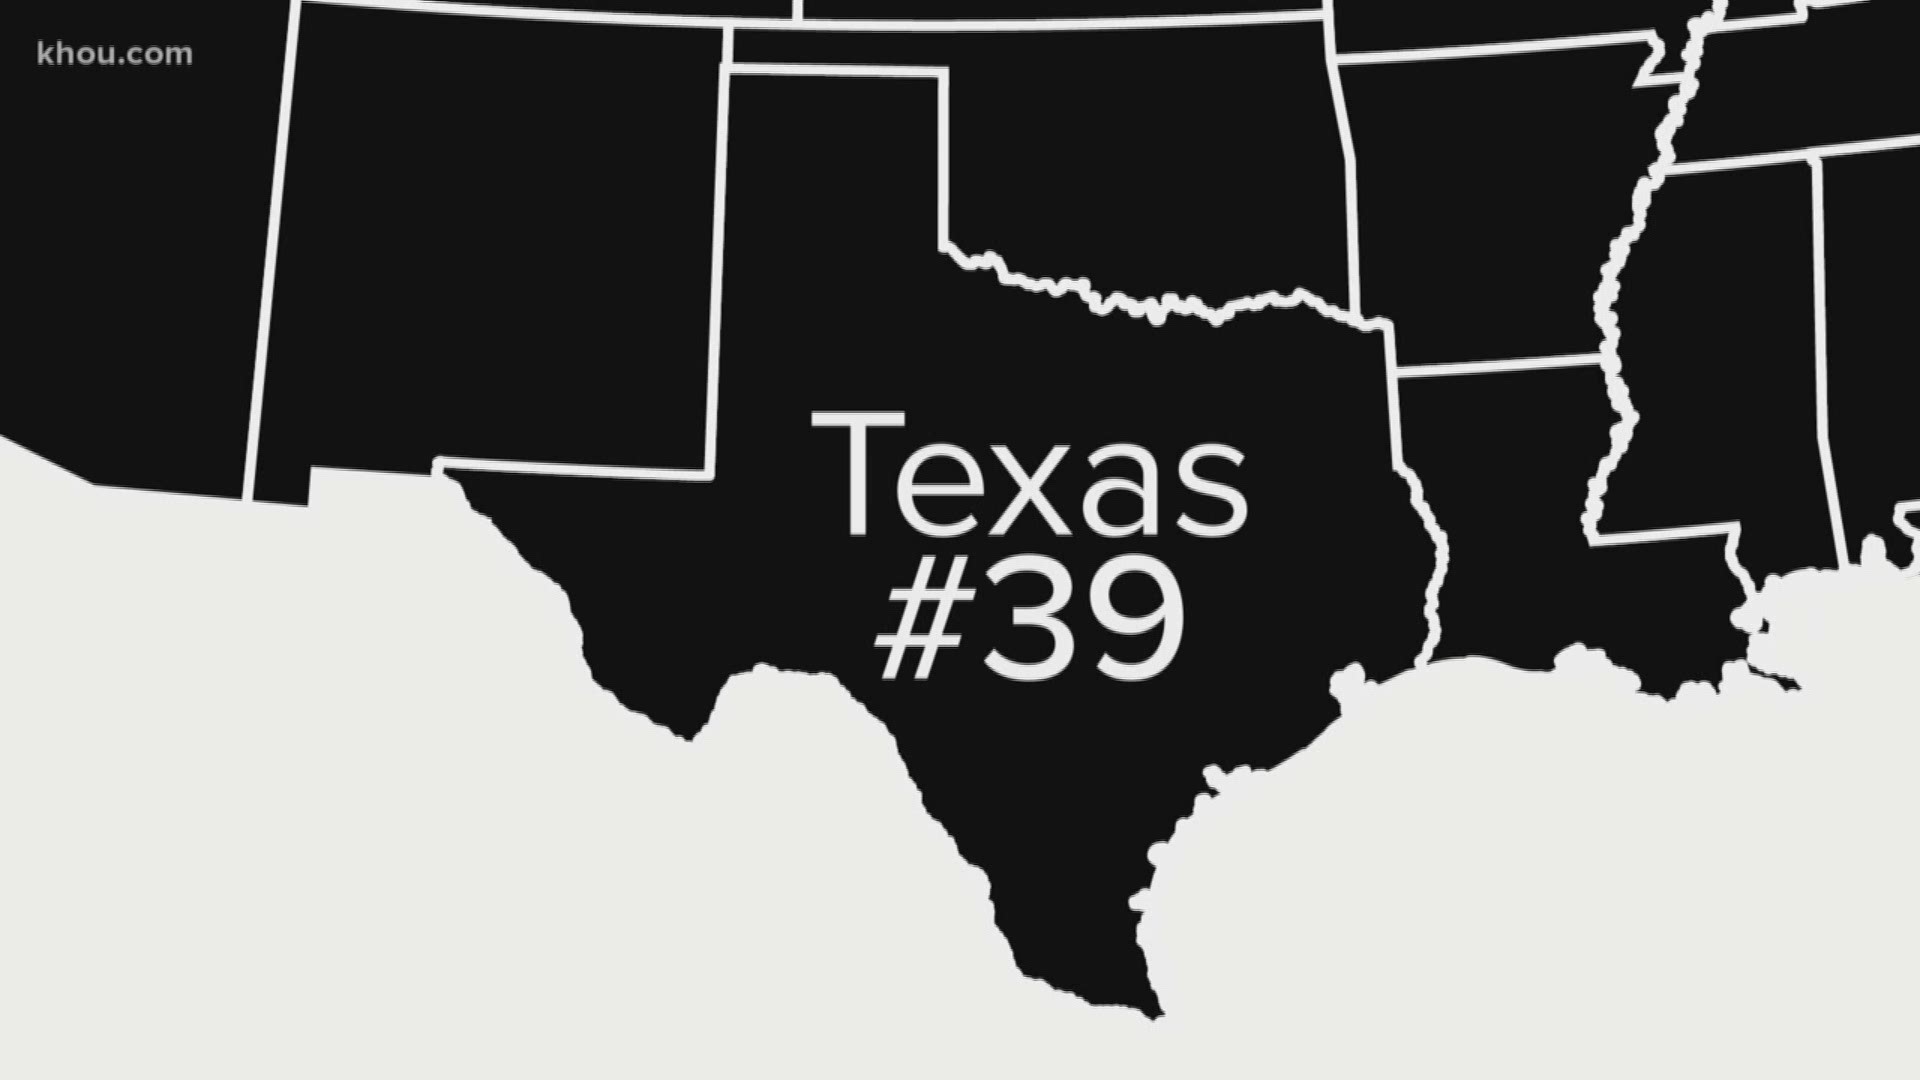 The state of Texas scored pretty low when it comes to the most educated states in America. Texas came in at number 39, according to WalletHub.